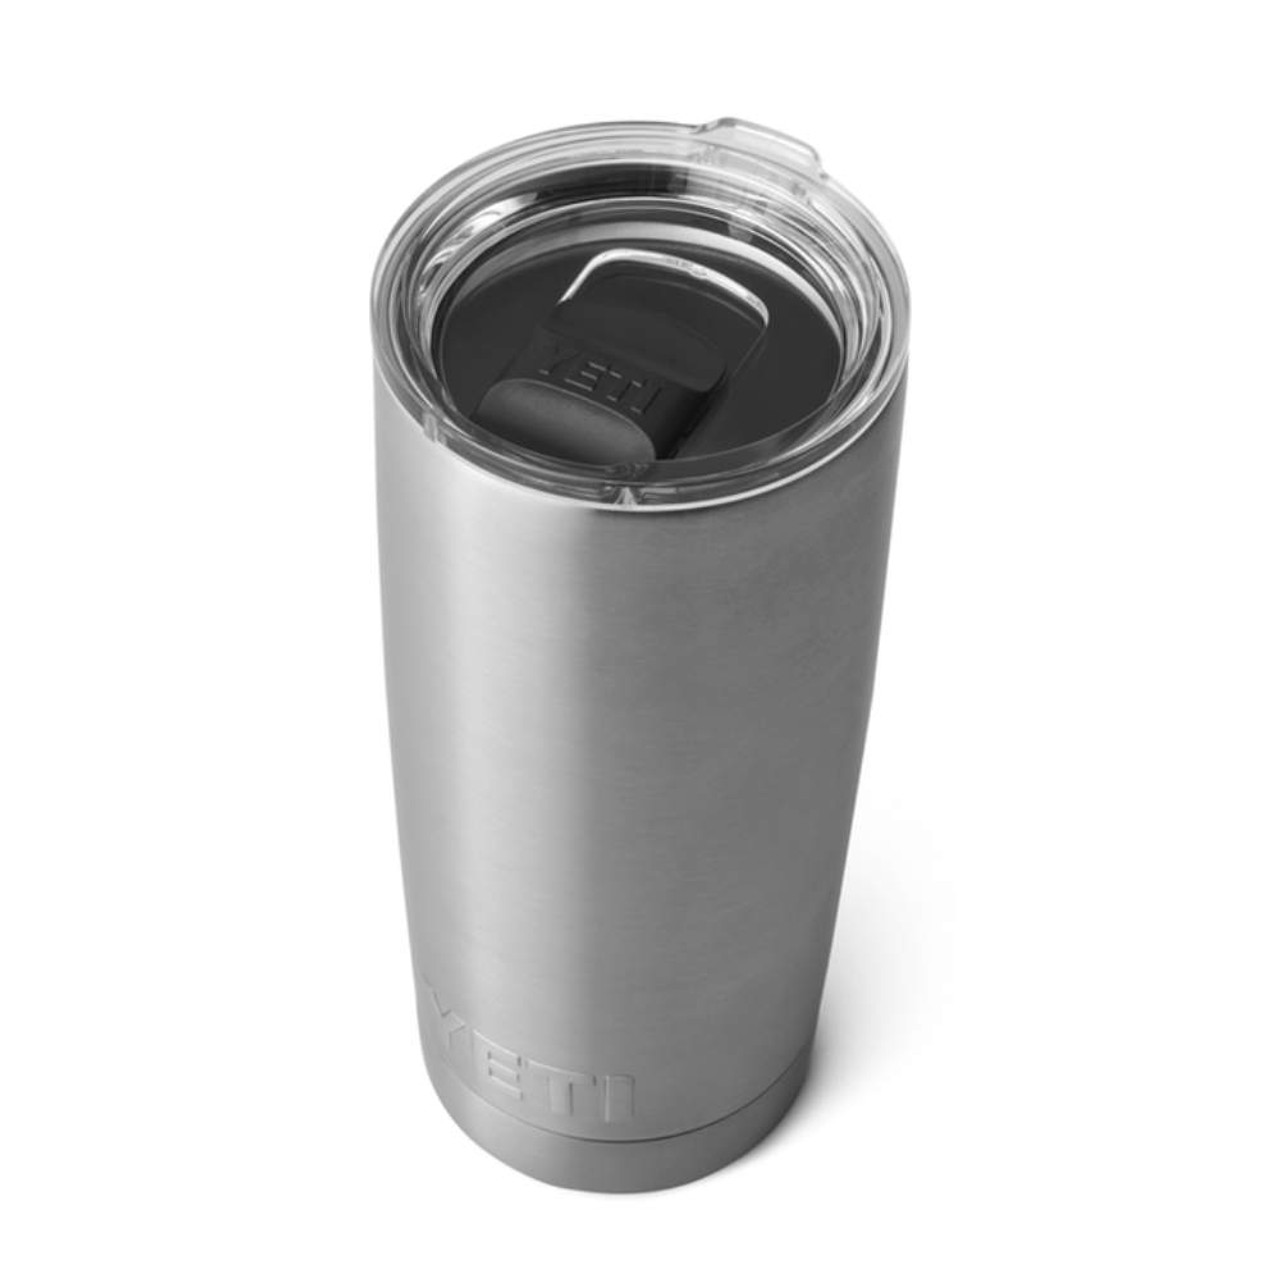 https://cdn11.bigcommerce.com/s-zut1msomd6/images/stencil/1280x1280/products/16023/215550/yeti-rambler-20oz-with-magslider-lid-YRAM20-STAINLES-Stainless-Steel-Top__86027.1654116099.jpg?c=1